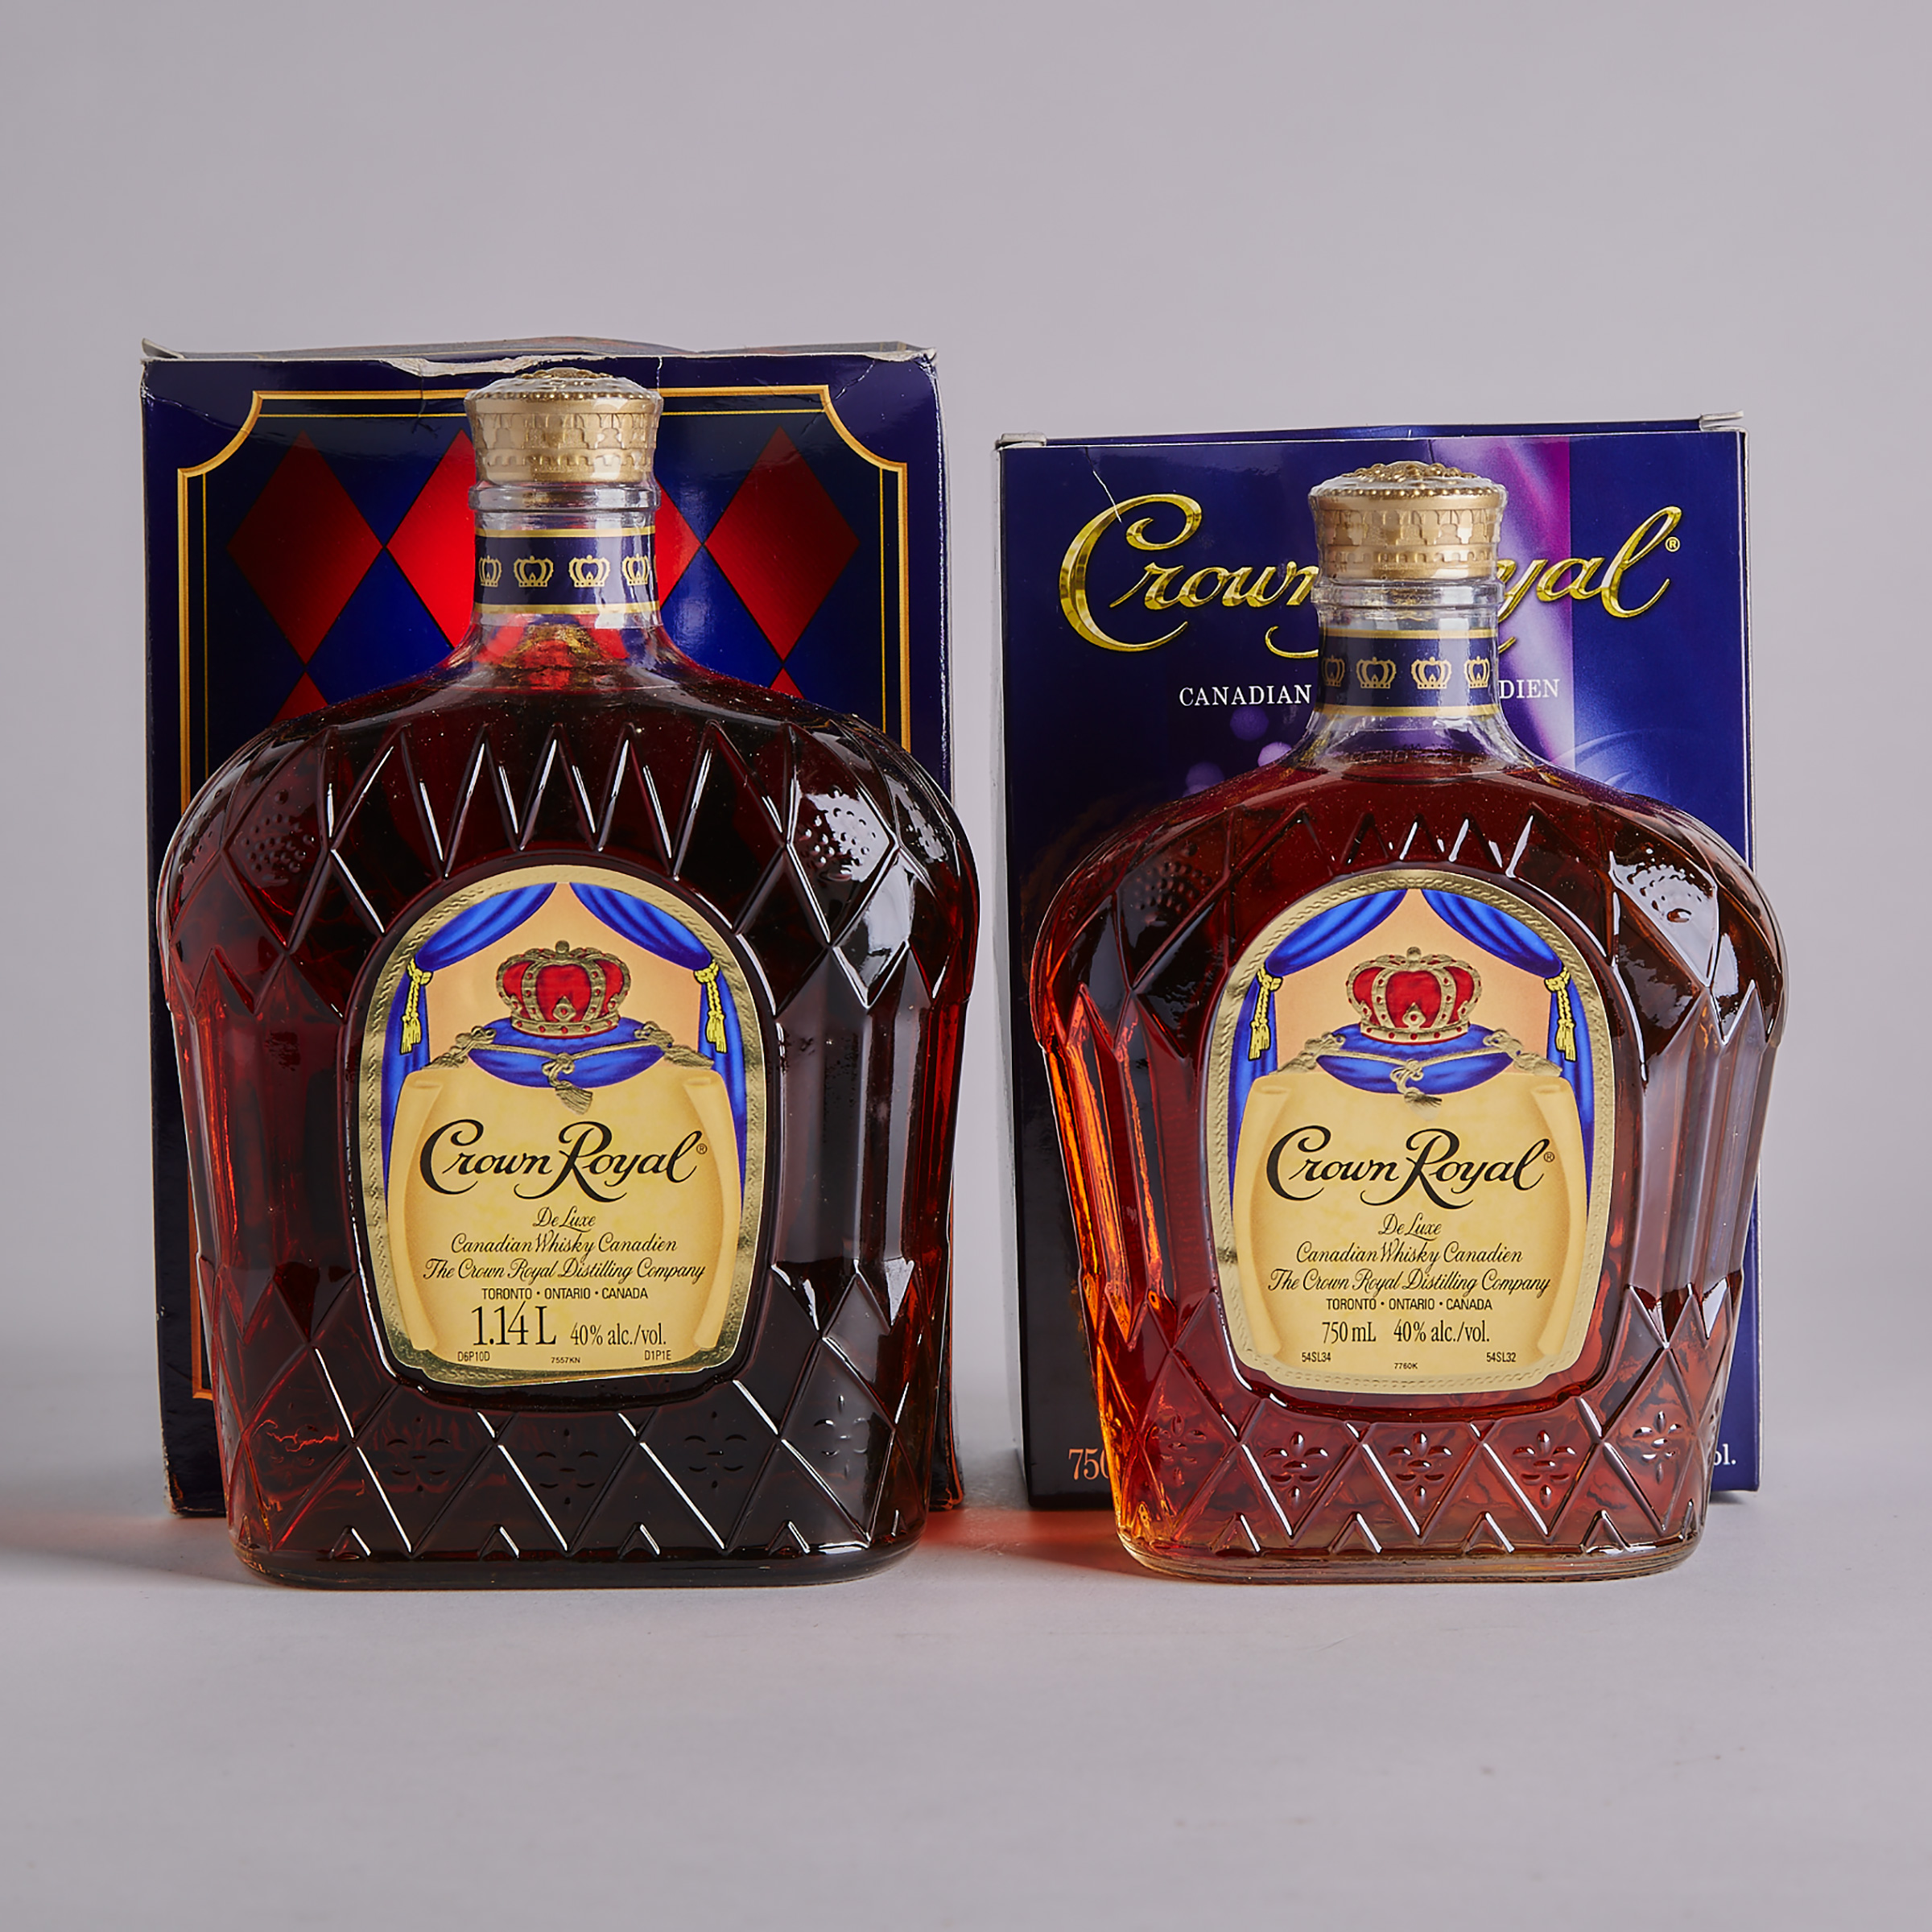 CROWN ROYAL DELUXE CANADIAN WHISKY (ONE 750 ML)
CROWN ROYAL DELUXE CANADIAN WHISKY (ONE 1140 ML)